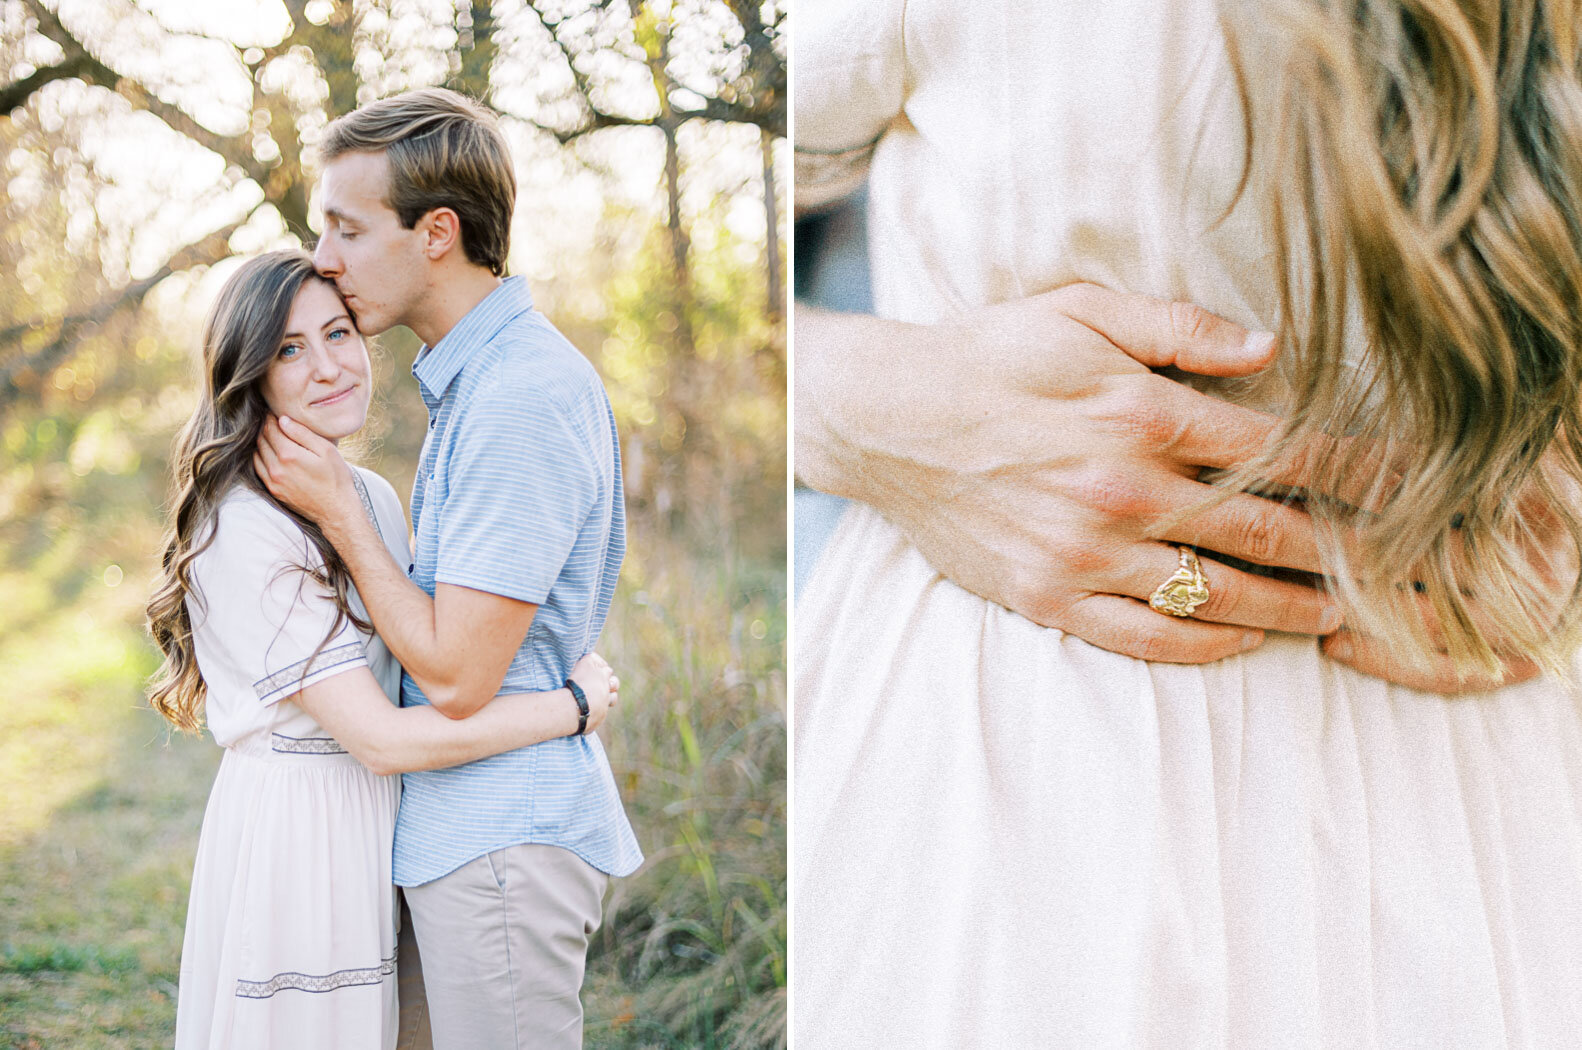 man-kisses-temple-of-his-fiance-during-their-fall-outdoor-engagement-session-in-charlottesville-virginia.jpg